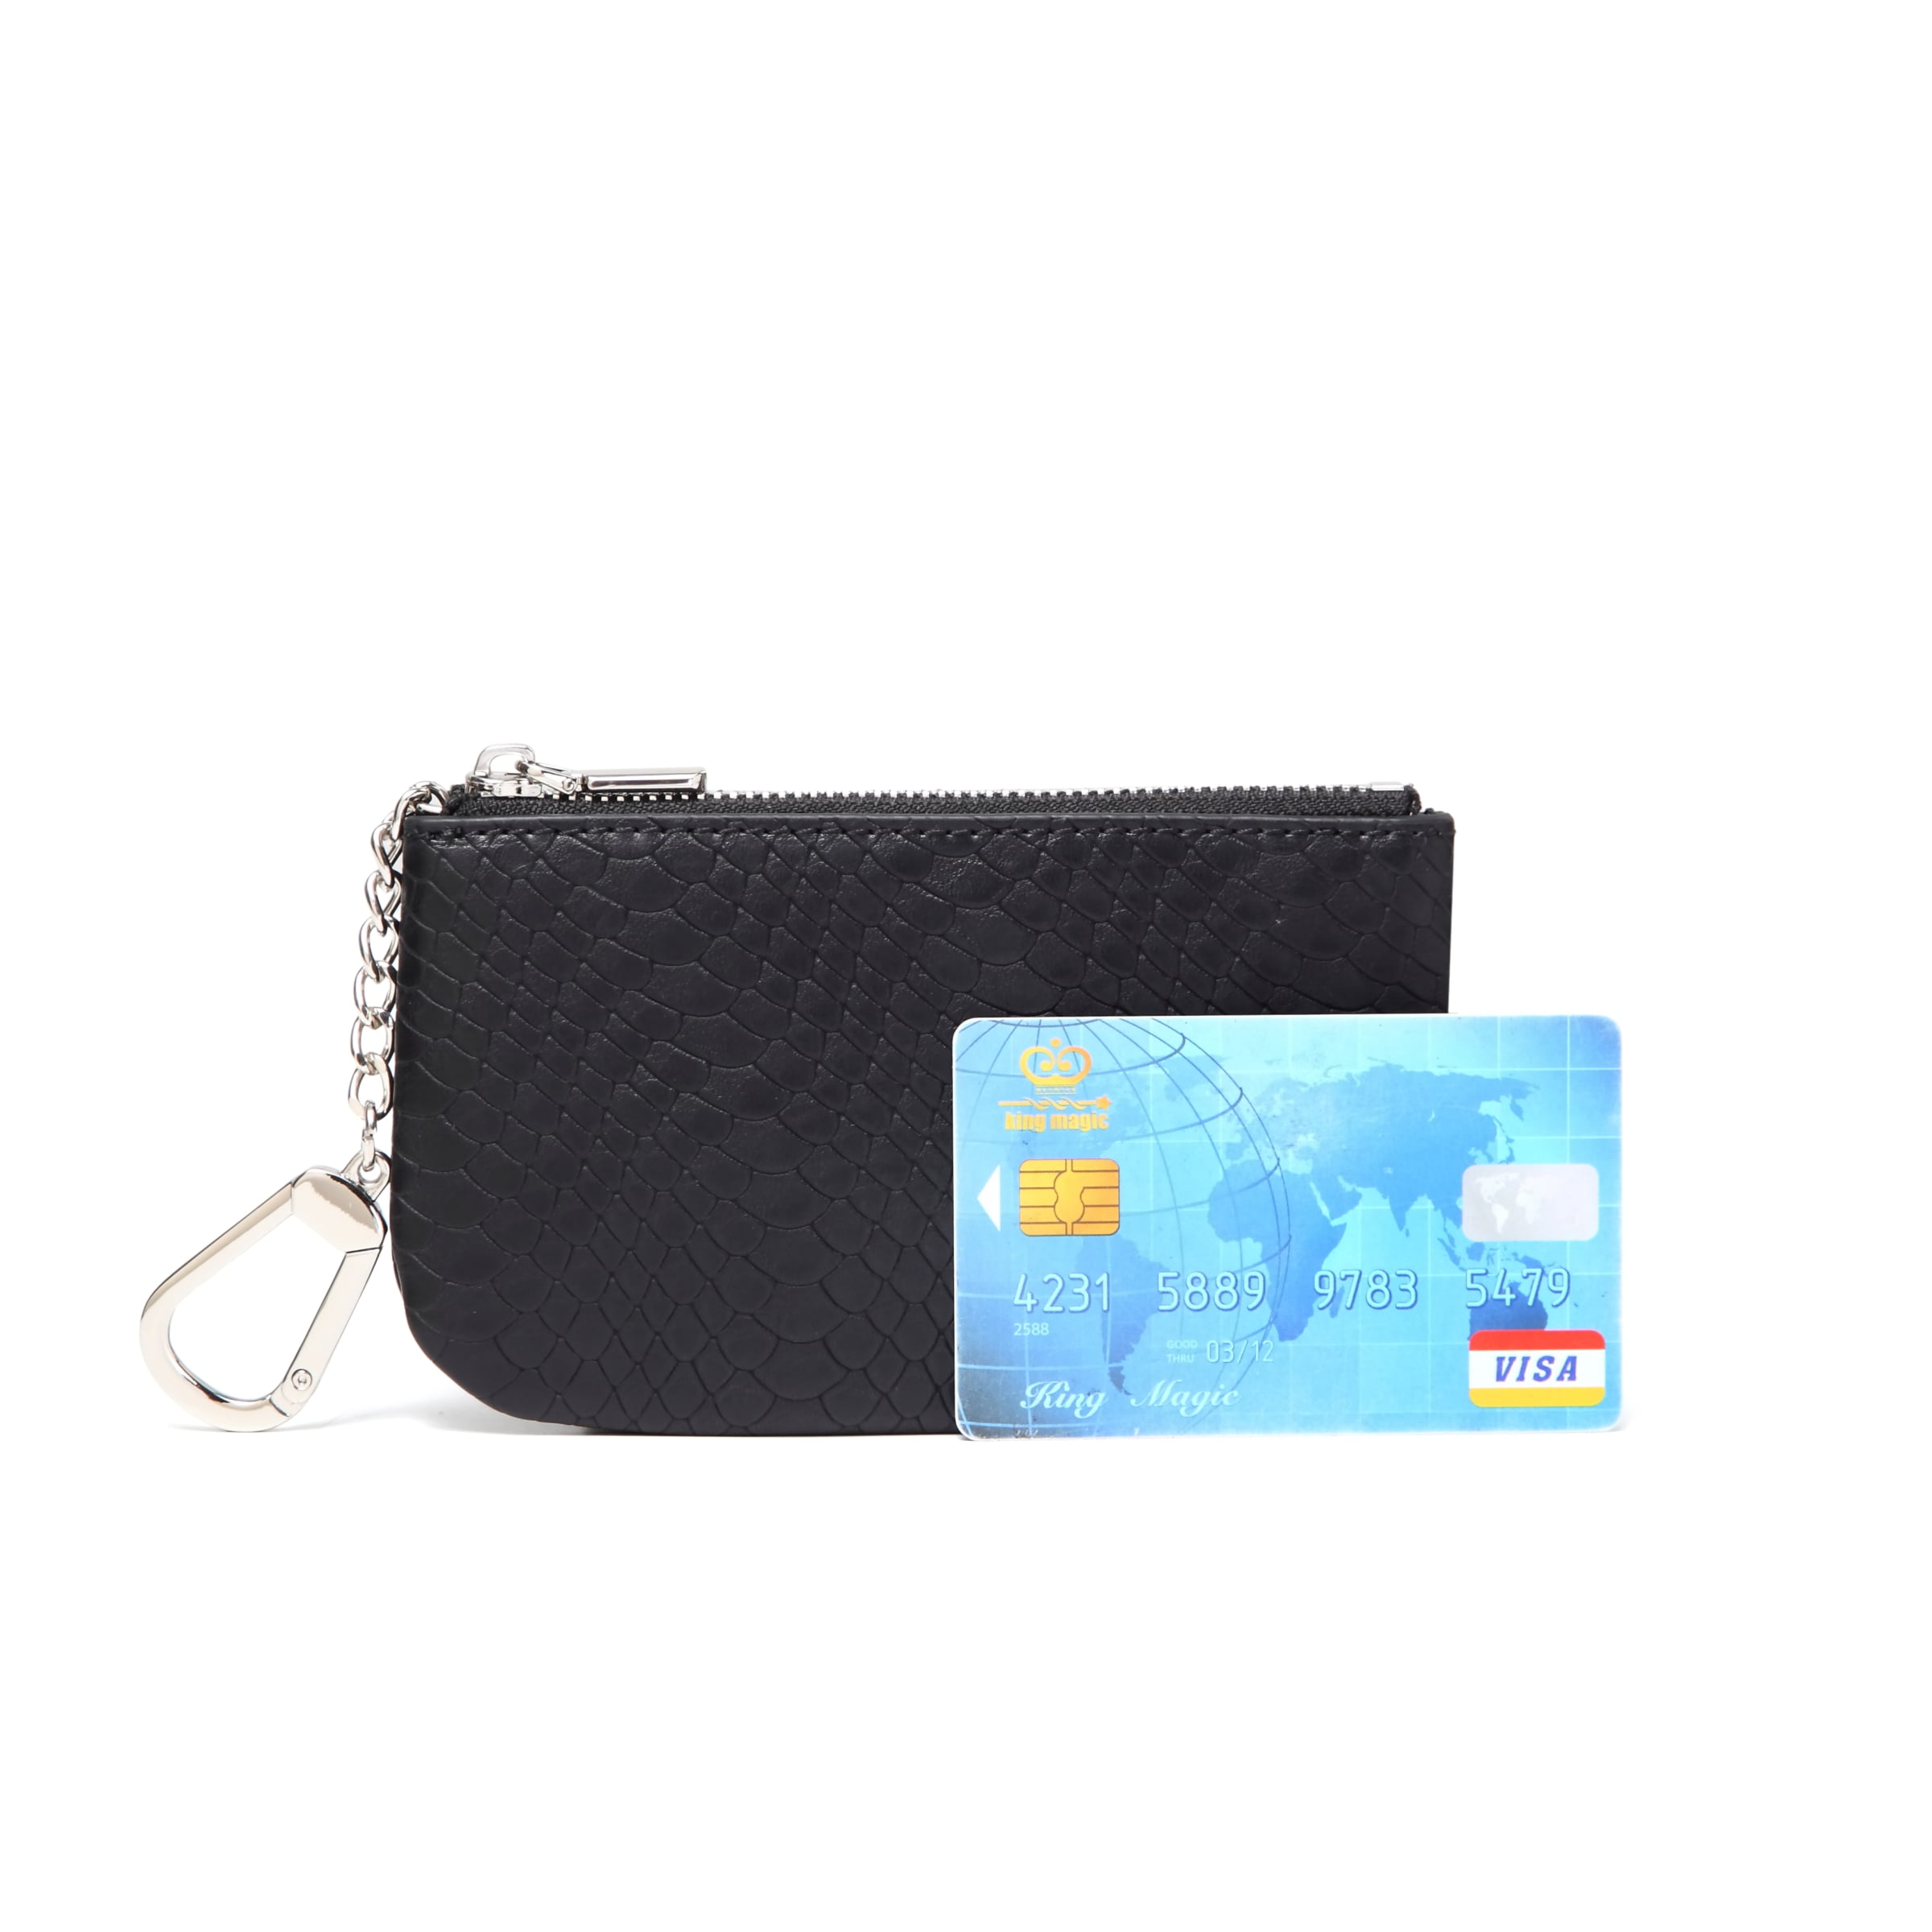 M82415 M82382 M82381 M82383 Lisa Wallet Key Pouch Coin Purse Woman Fashion  Designer Luxury Credit Card Holder Business High Quality TOP 5A Fast  Delivery From Shoebags_story, $70.06